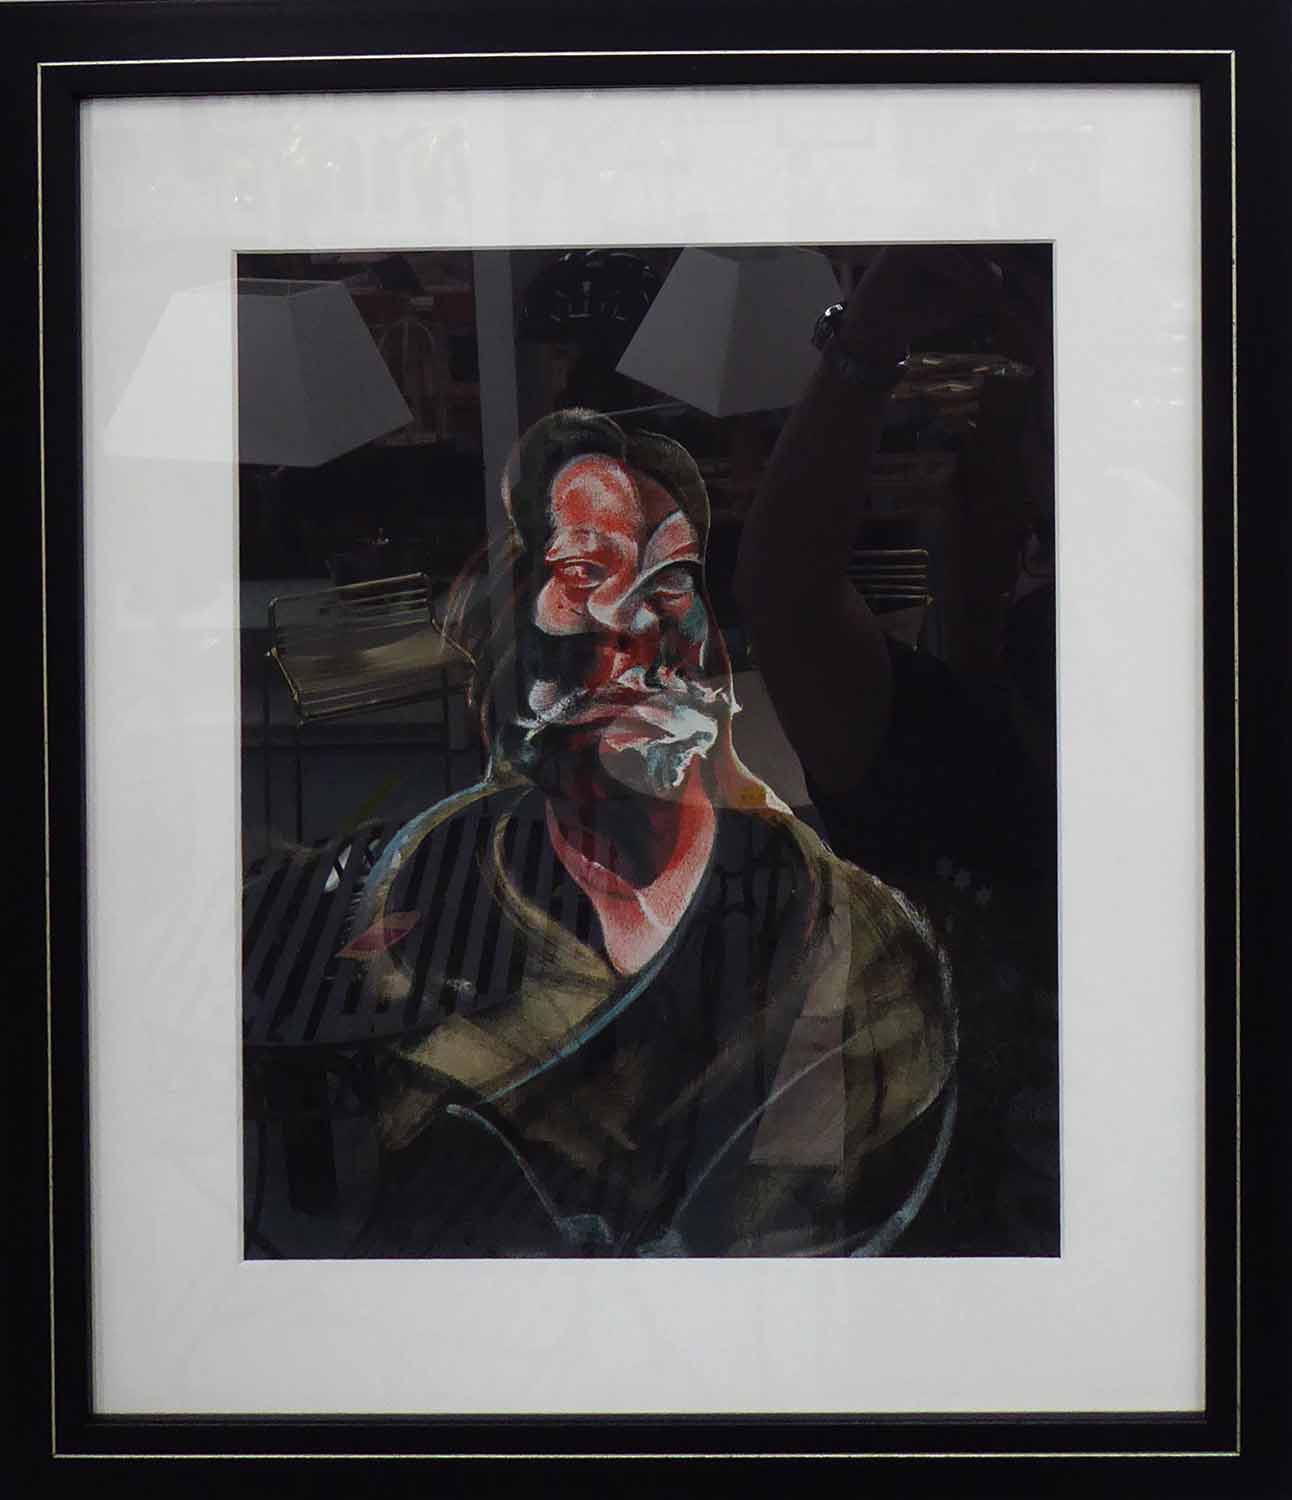 FRANCIS BACON, 'Portrait of Isabel Rawsthorne', 1966, lithograph, printed by Maeght, 29cm x 24cm,